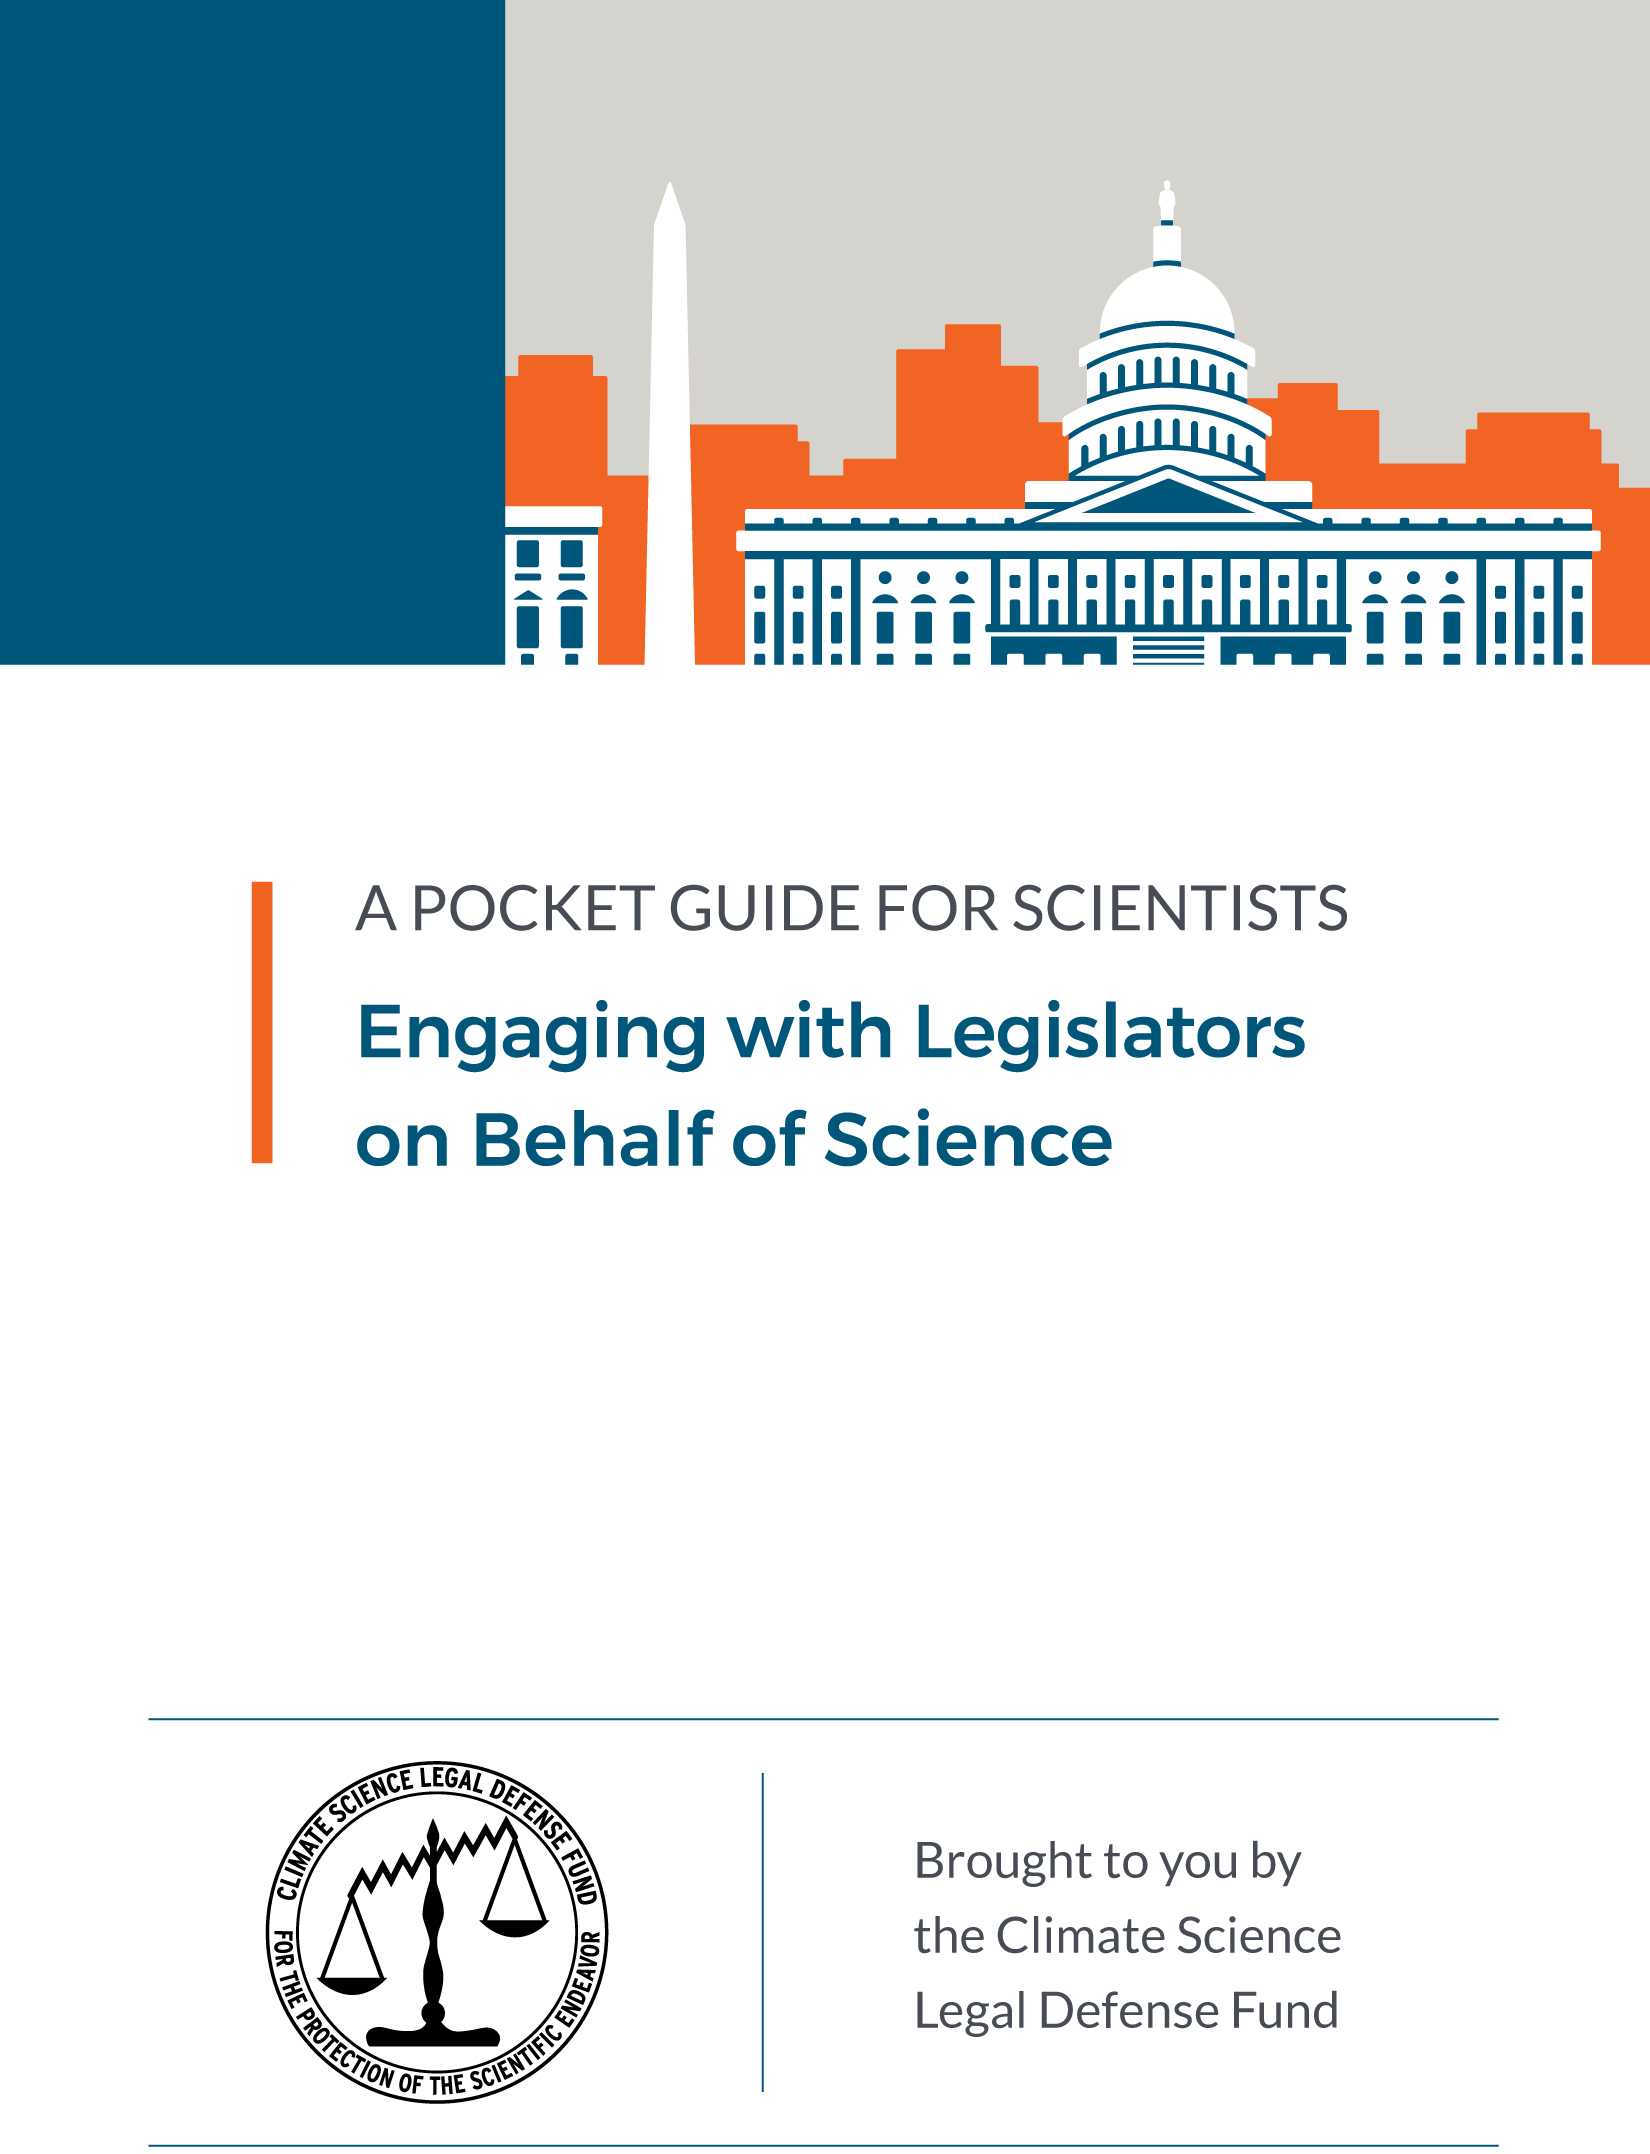 A Pocket Guide for Scientists: Engaging with Legislators on Behalf of Science